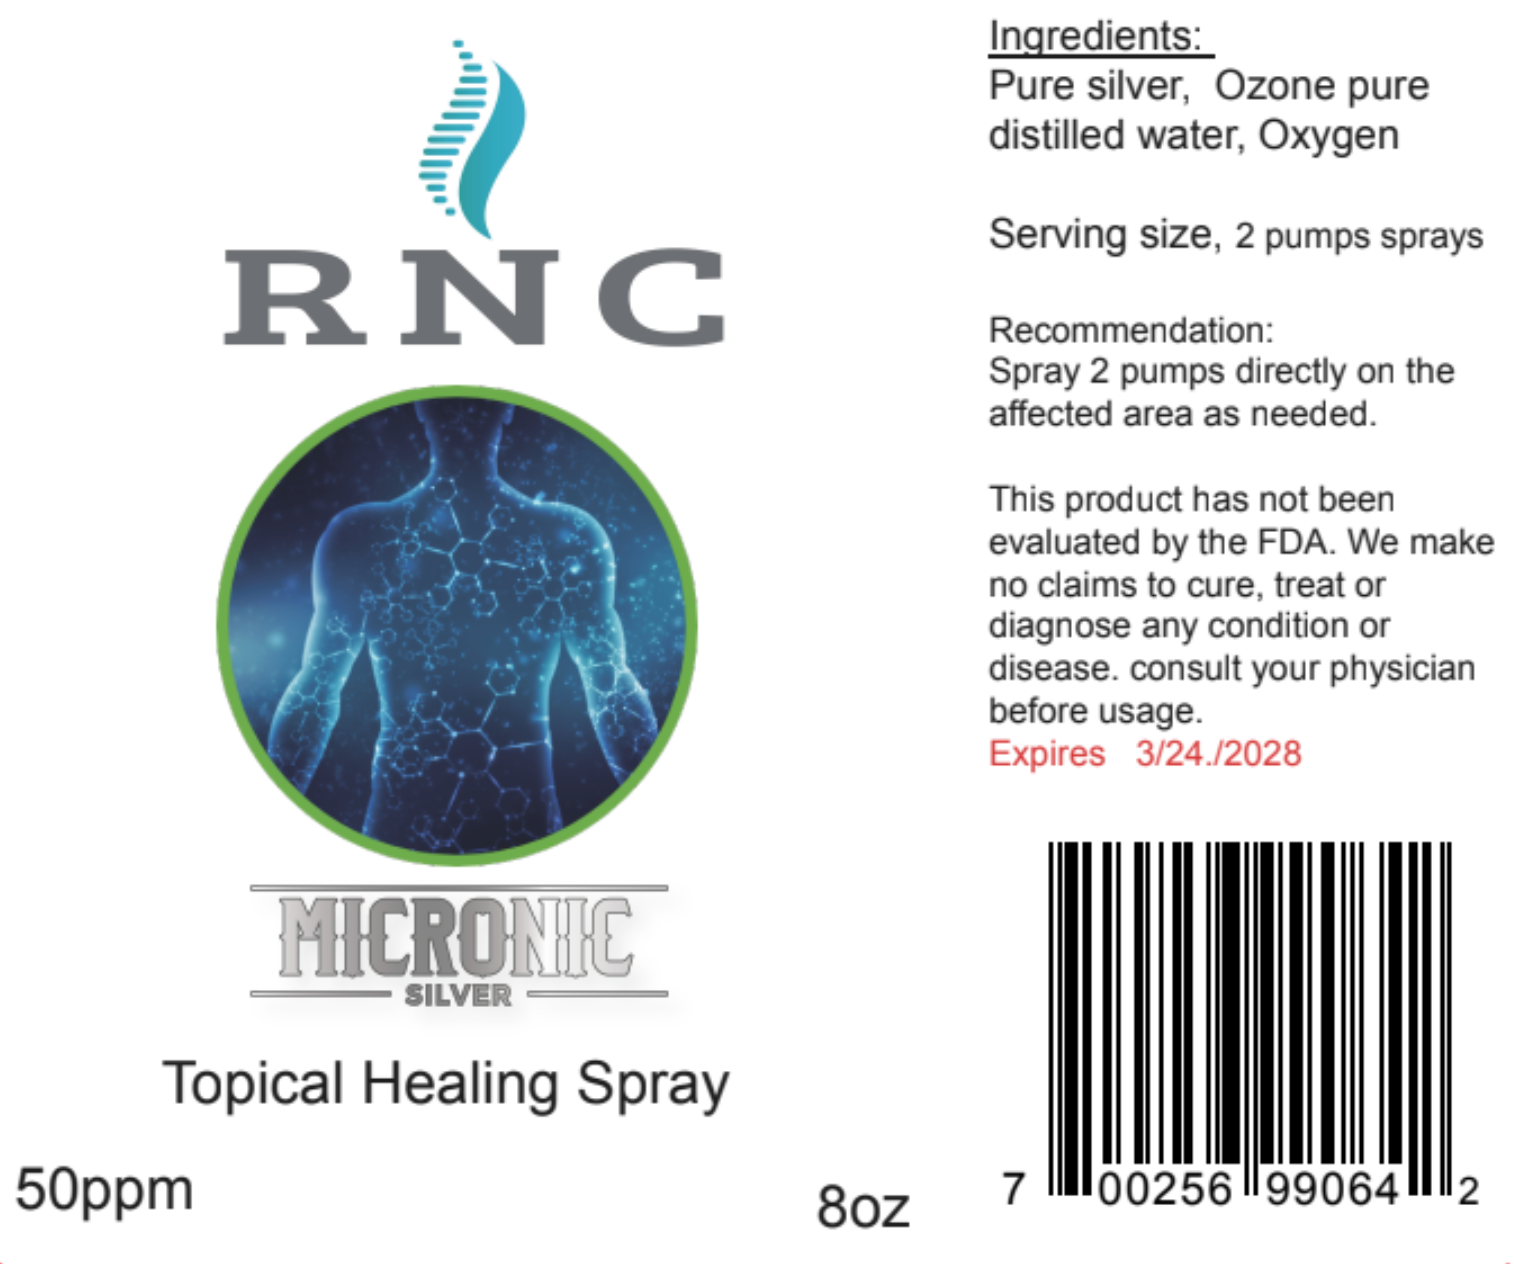 Micronic Silver Topical Healing Spray - 8oz. - 50ppm